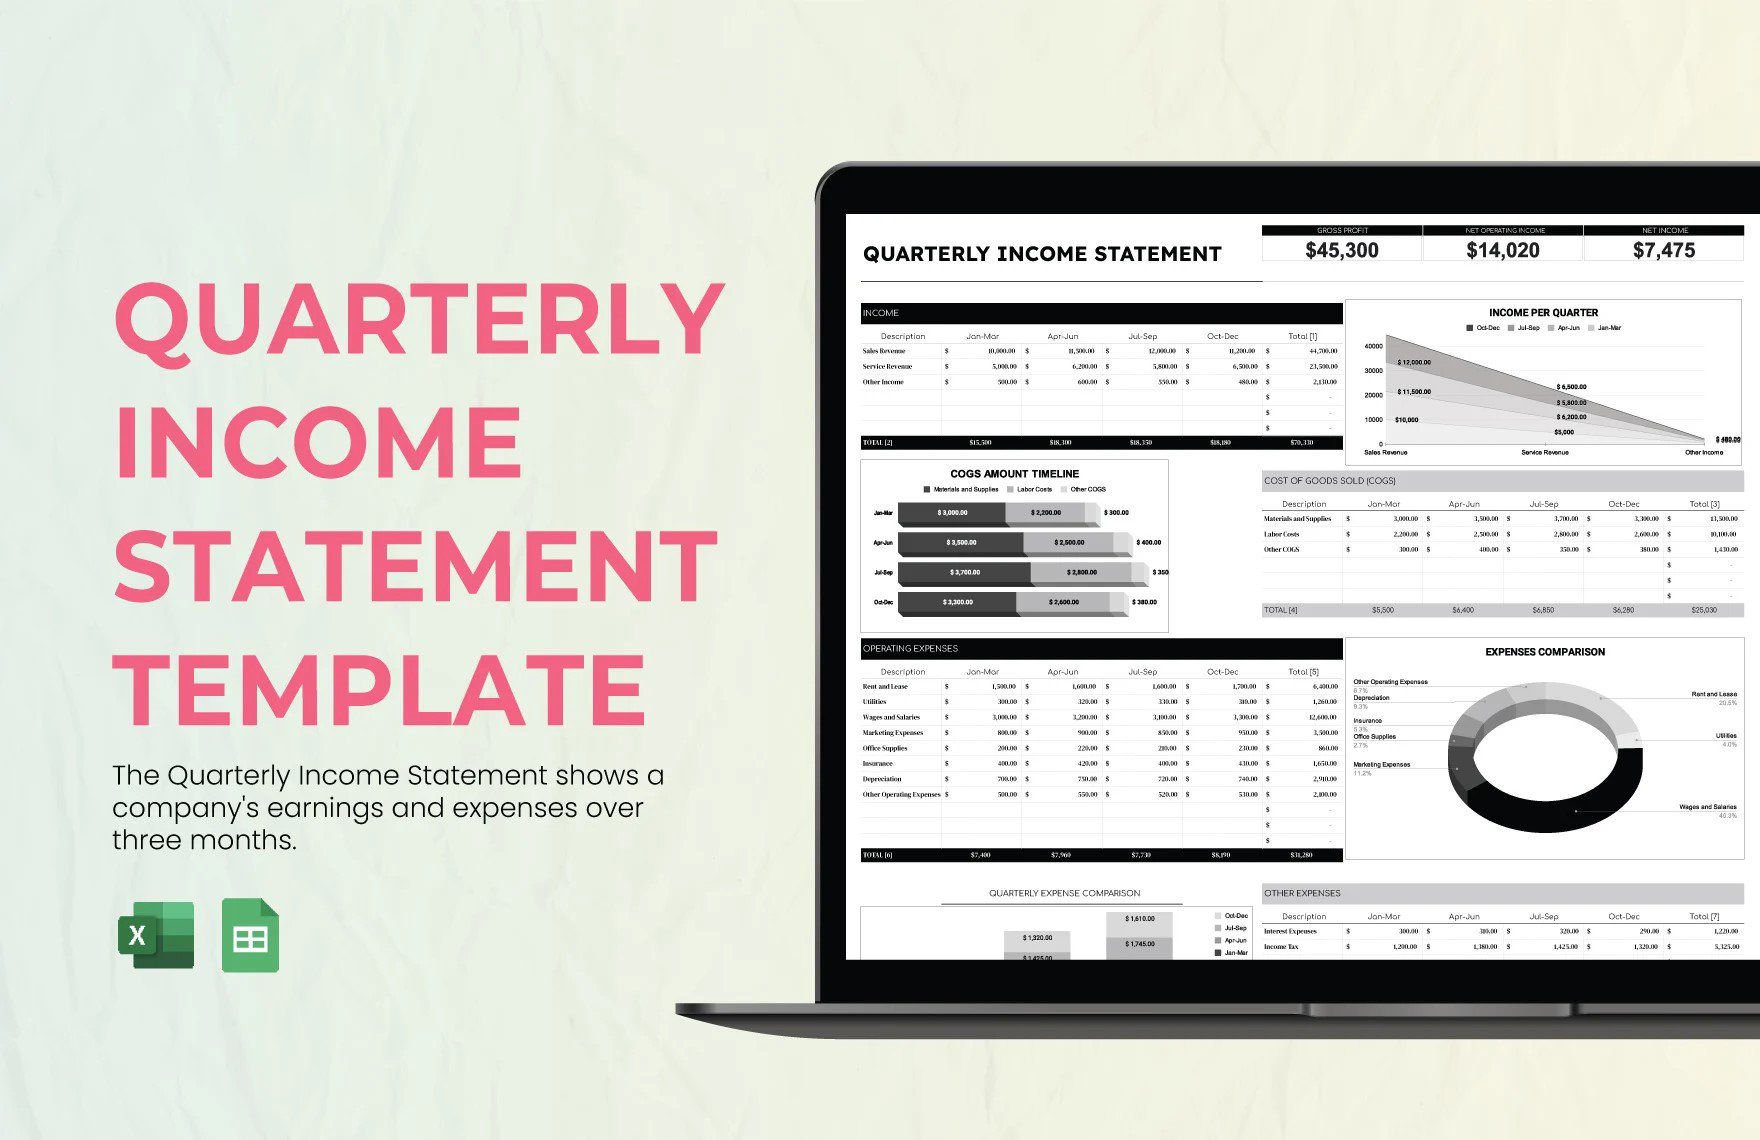 Quarterly Income Statement Template in Excel, Google Sheets